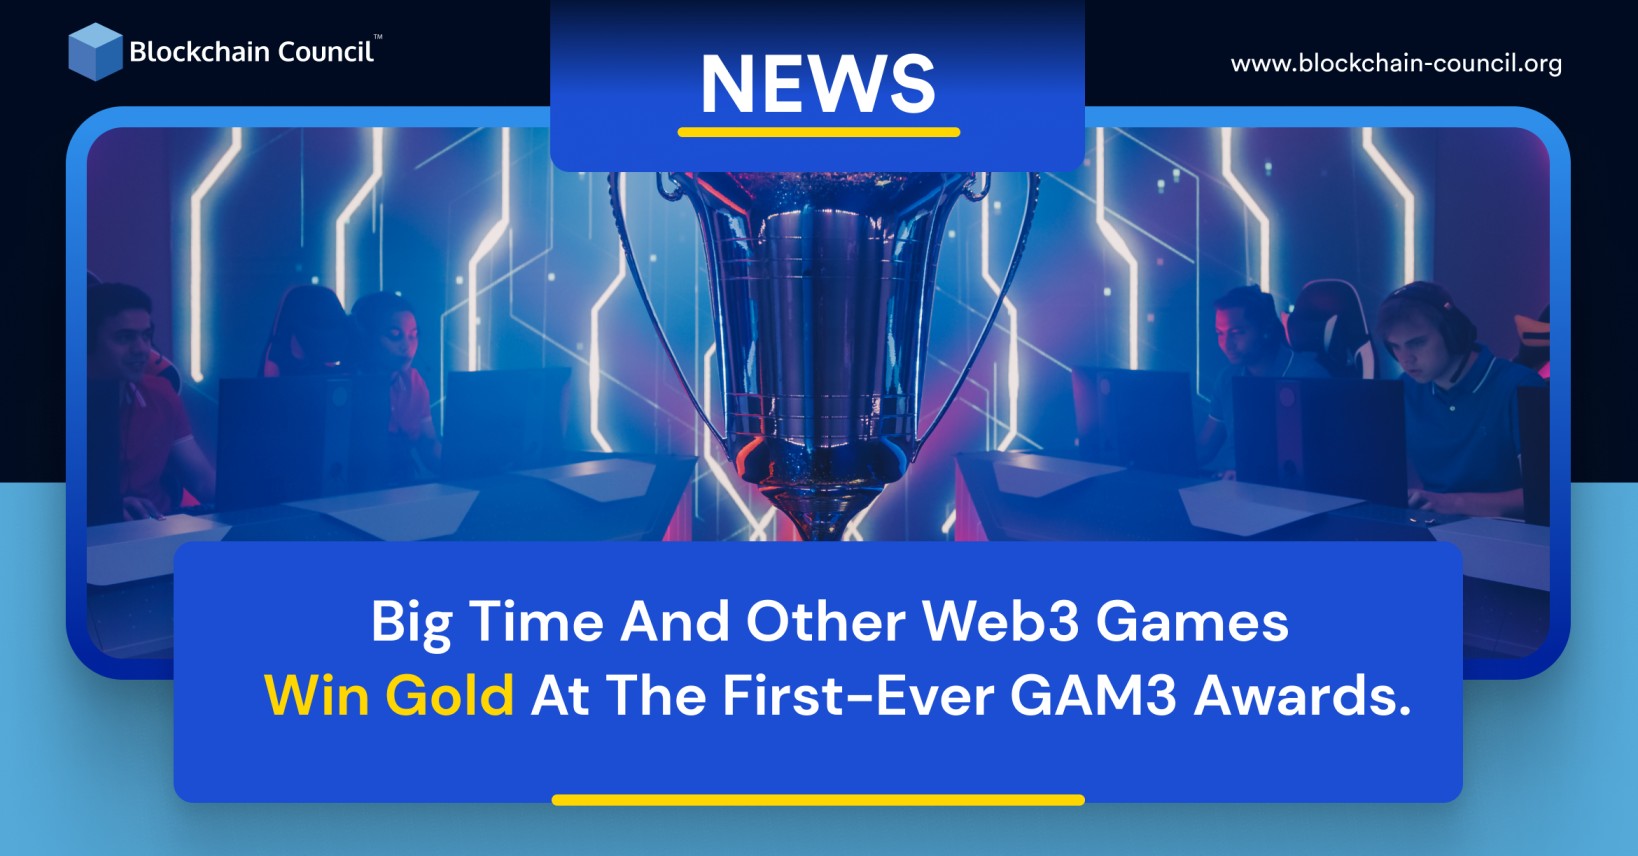 Big Time And Other Web3 Games Win Gold At The First-Ever GAM3 Awards